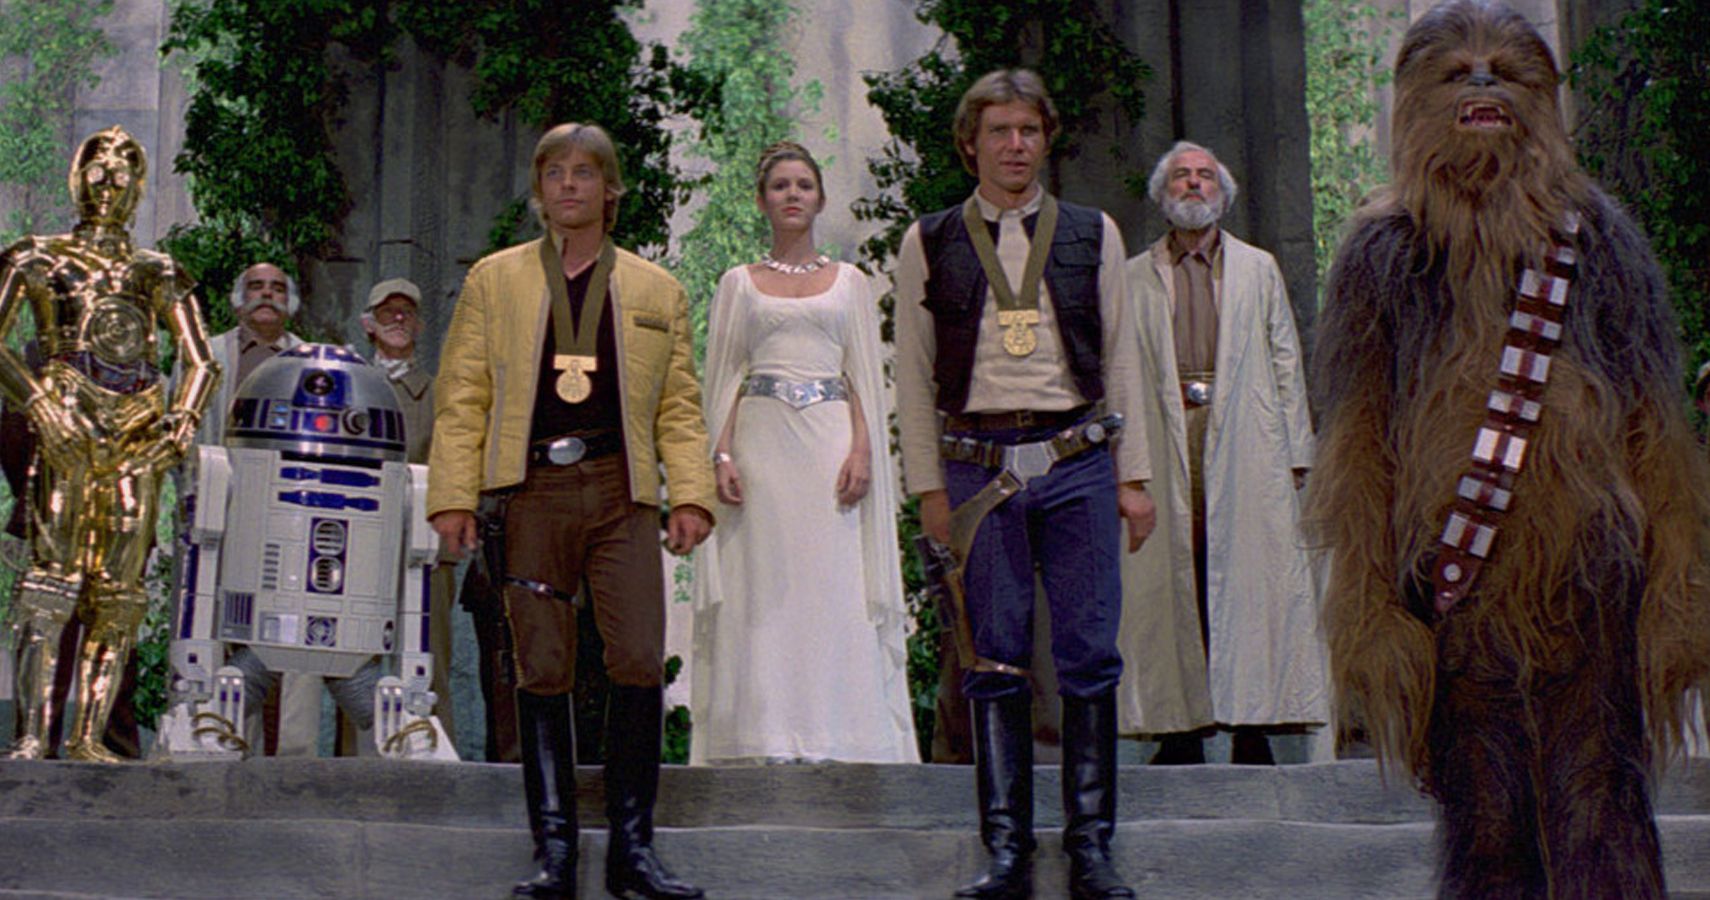 Who are the members of the Rebel Alliance in Star Wars?